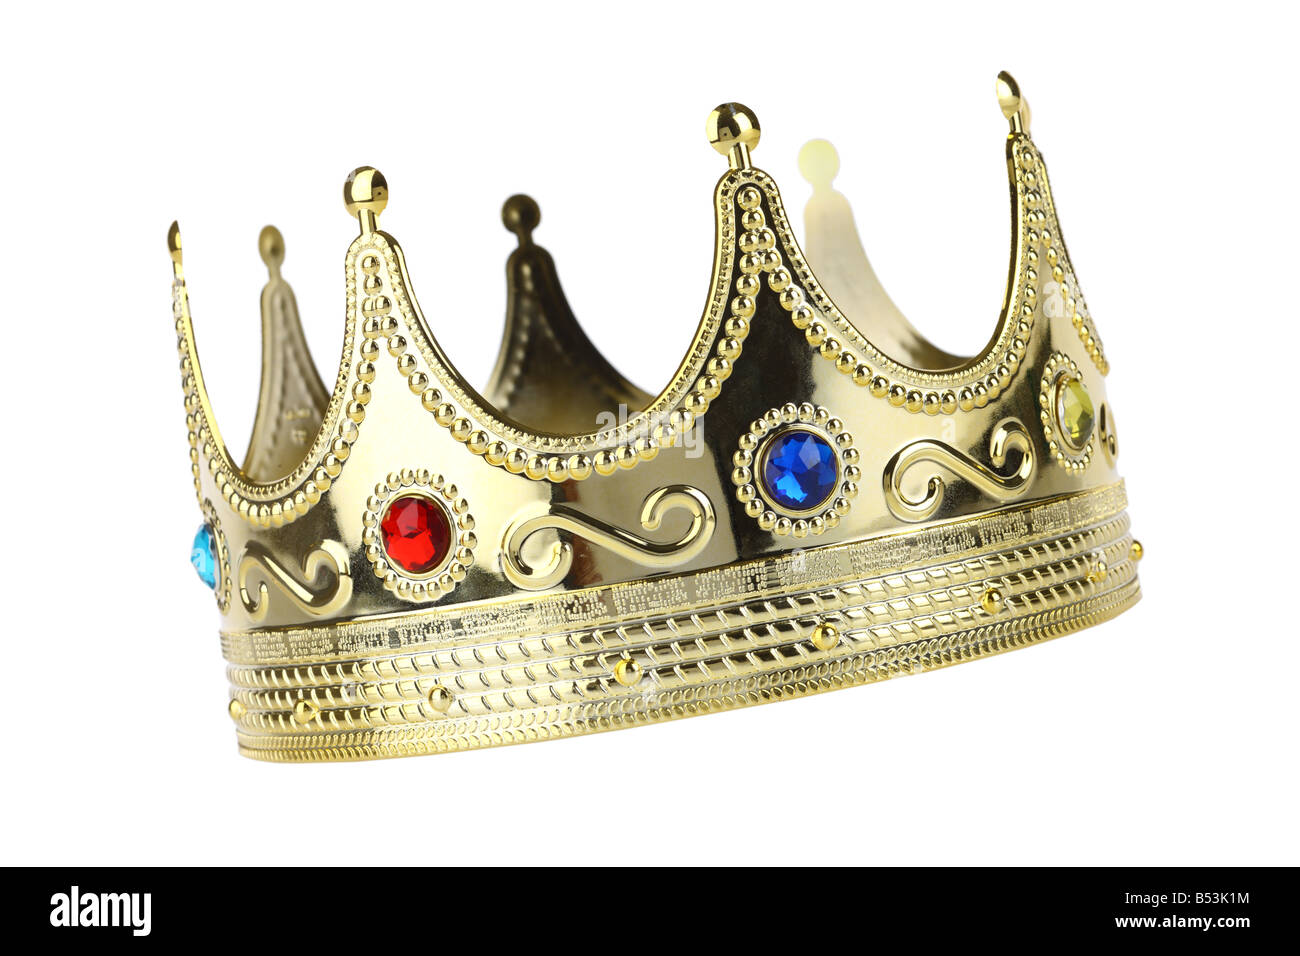 Kings crown cutout isolated on white background Stock Photo